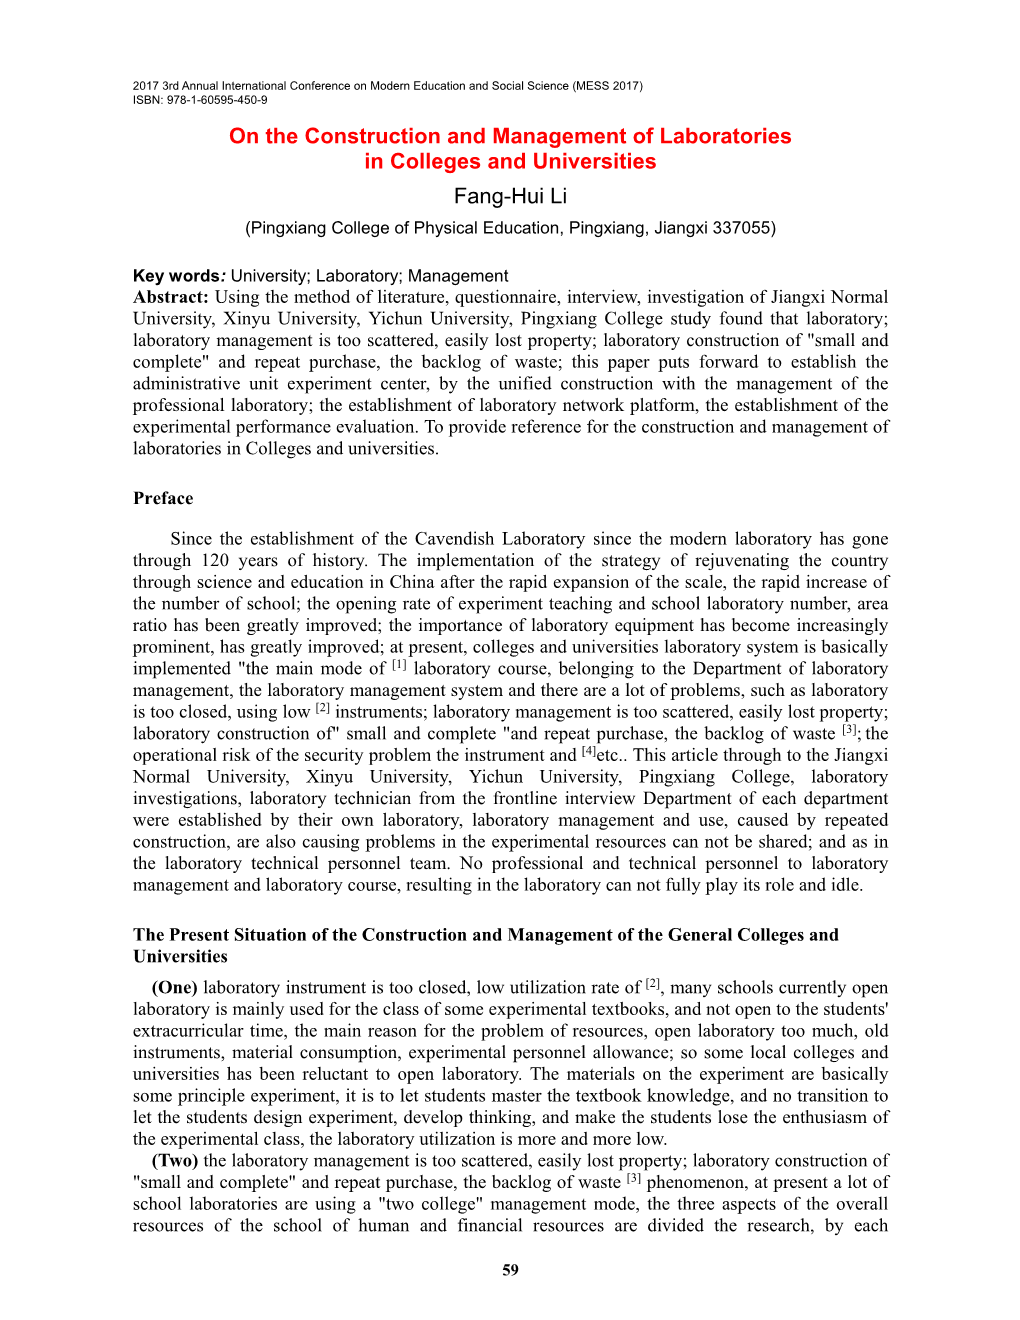 On the Construction and Management of Laboratories in Colleges and Universities Fang-Hui Li (Pingxiang College of Physical Education, Pingxiang, Jiangxi 337055)